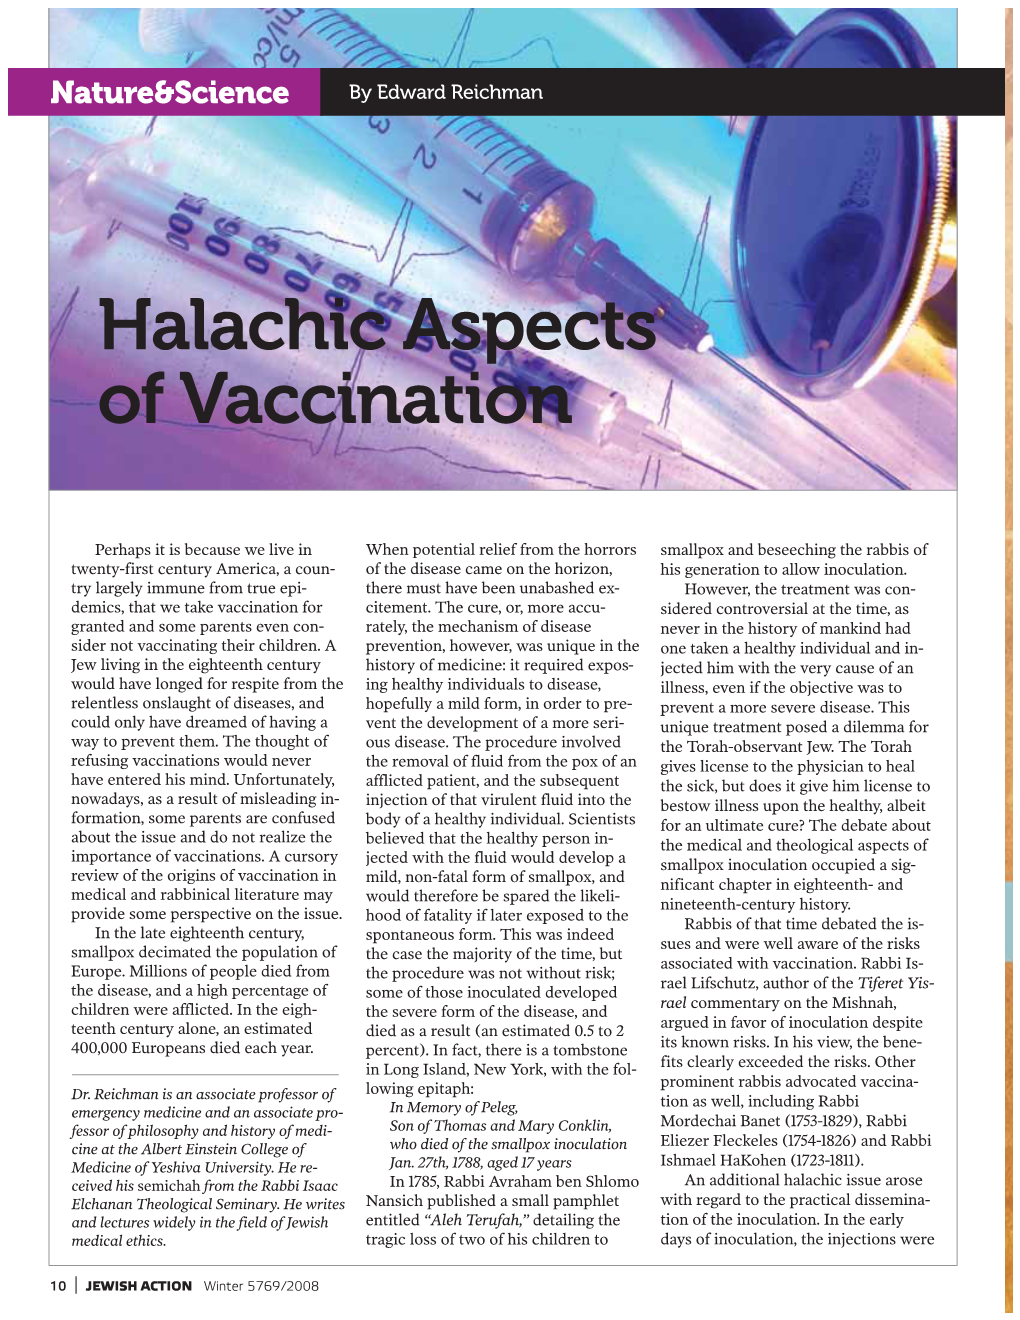 Halachic Aspects of Vaccination